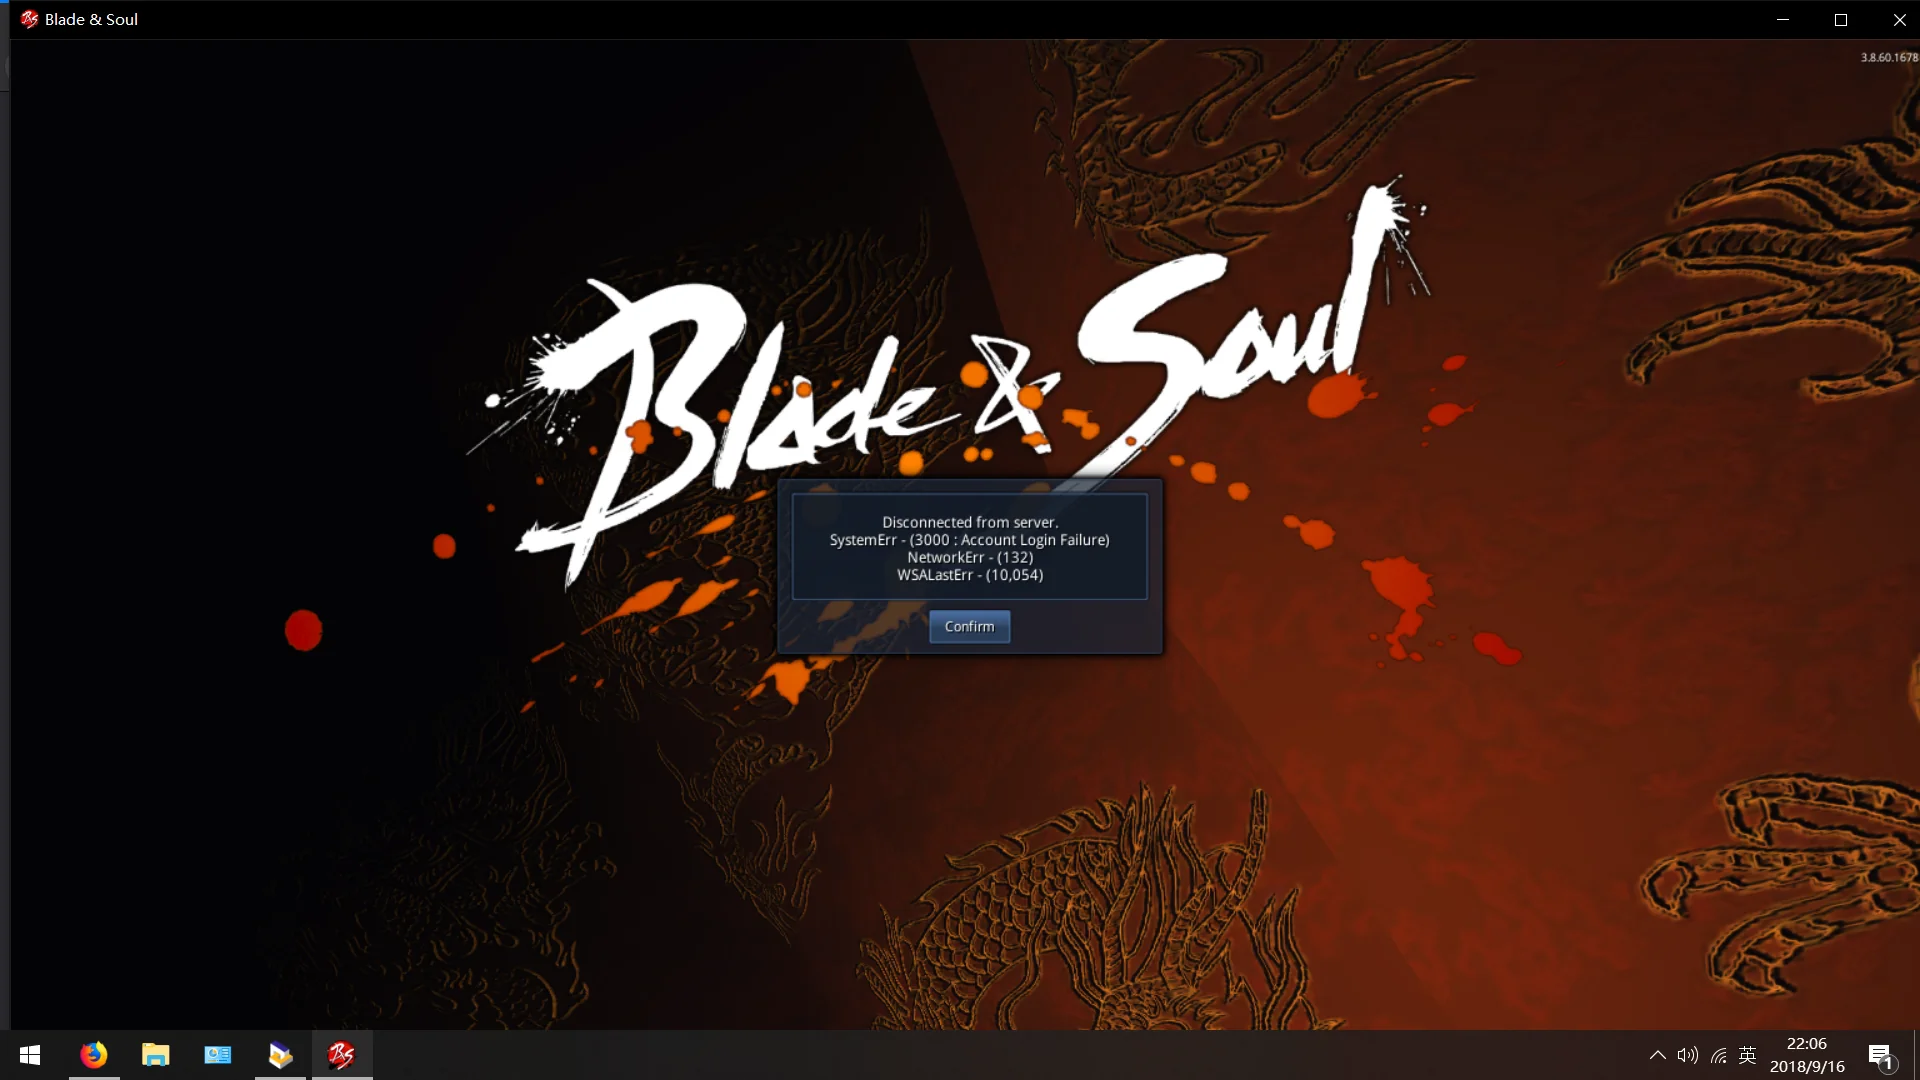 How To Fix Blade And Soul Network Error?